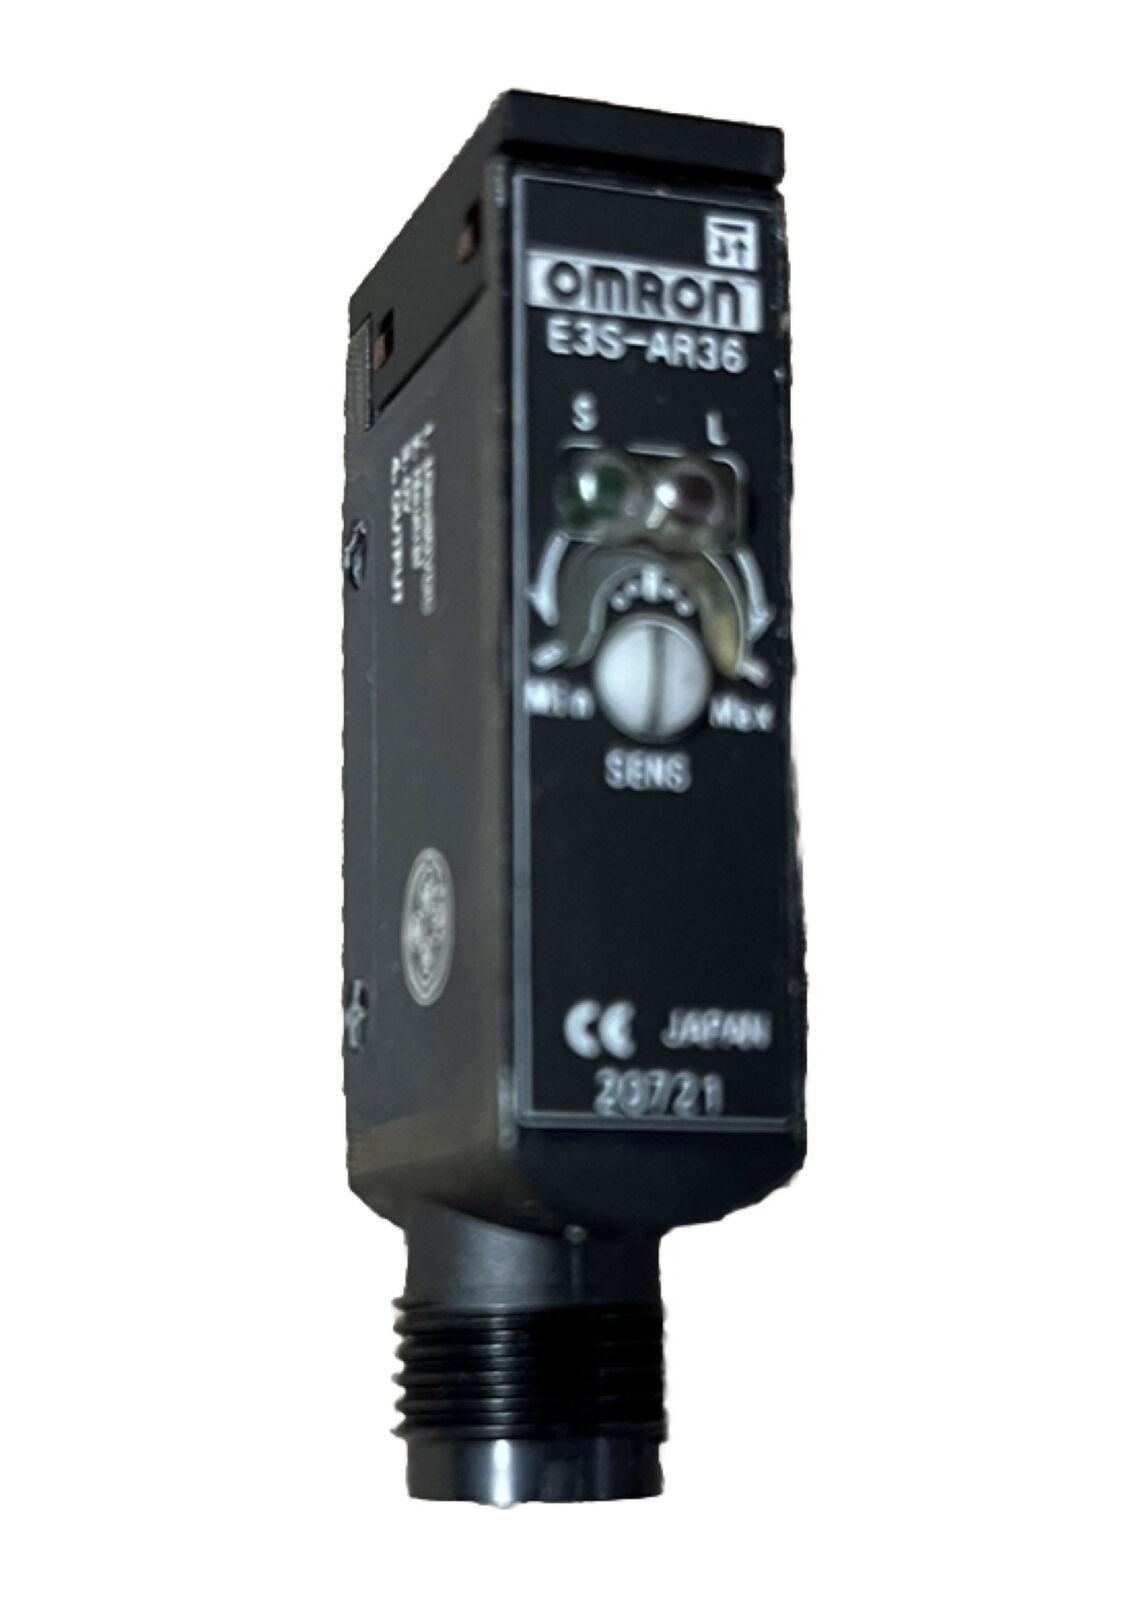 Omron Photoelectric Switch E3S-AR36 Retro Reflective